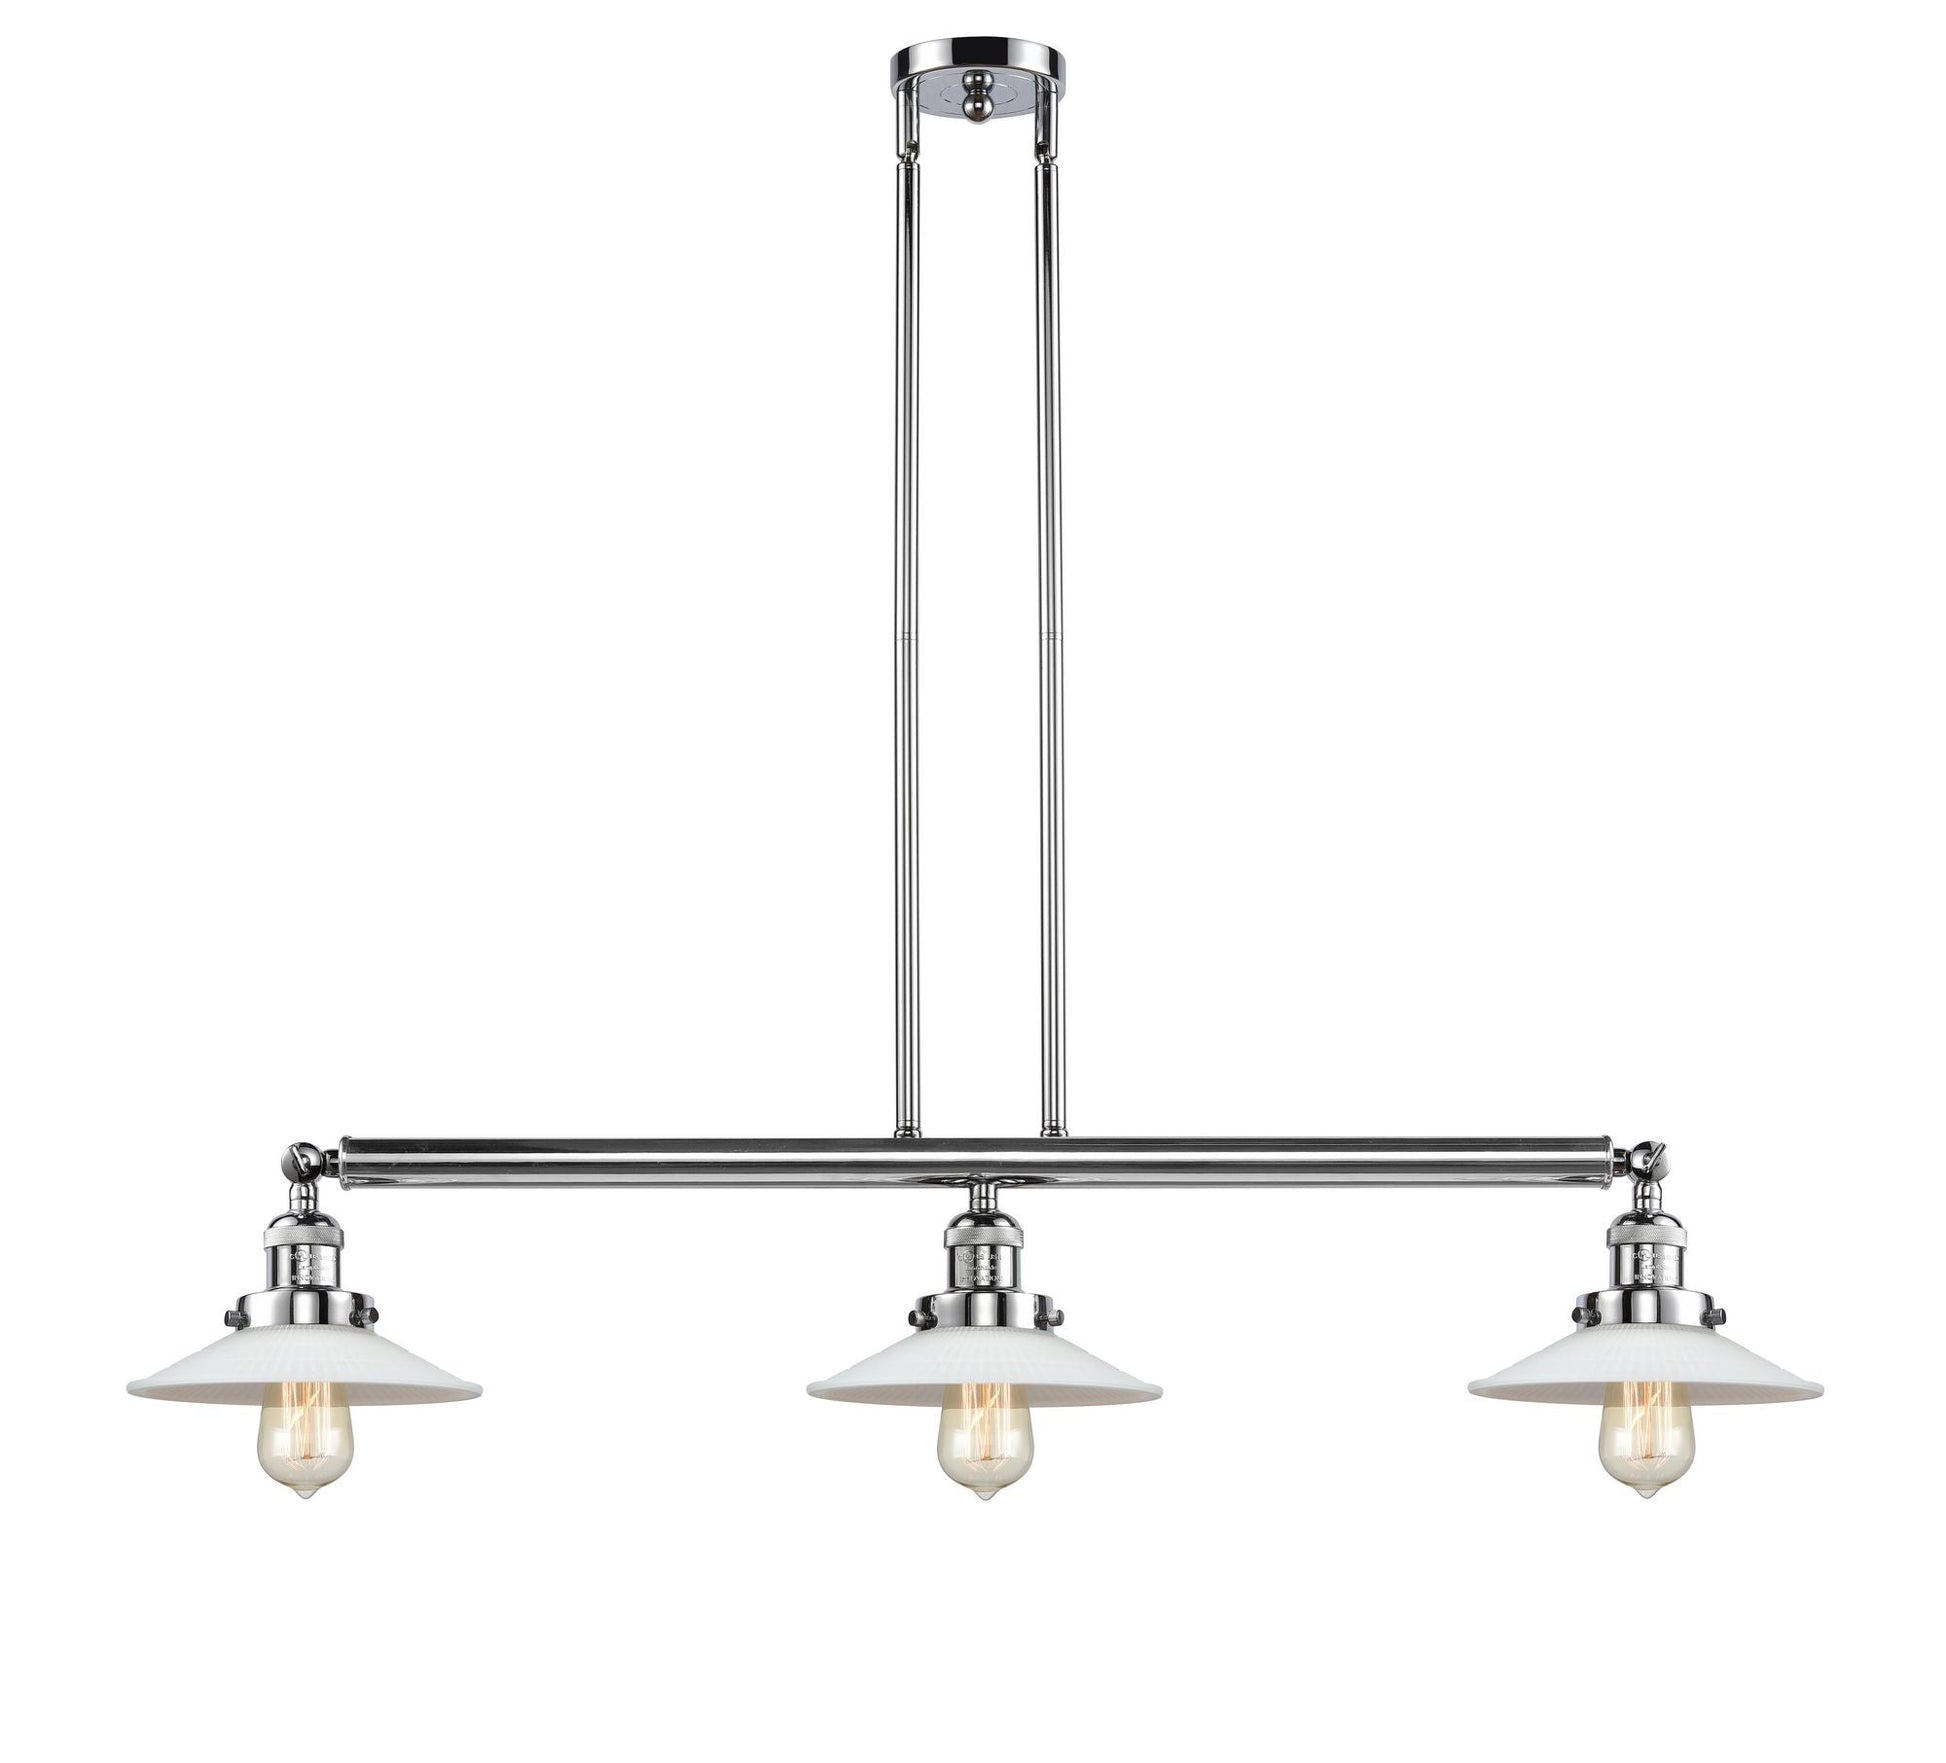 213-PC-G1 3-Light 41" Polished Chrome Island Light - White Halophane Glass - LED Bulb - Dimmensions: 41 x 8.5 x 8<br>Minimum Height : 16.25<br>Maximum Height : 40.25 - Sloped Ceiling Compatible: Yes